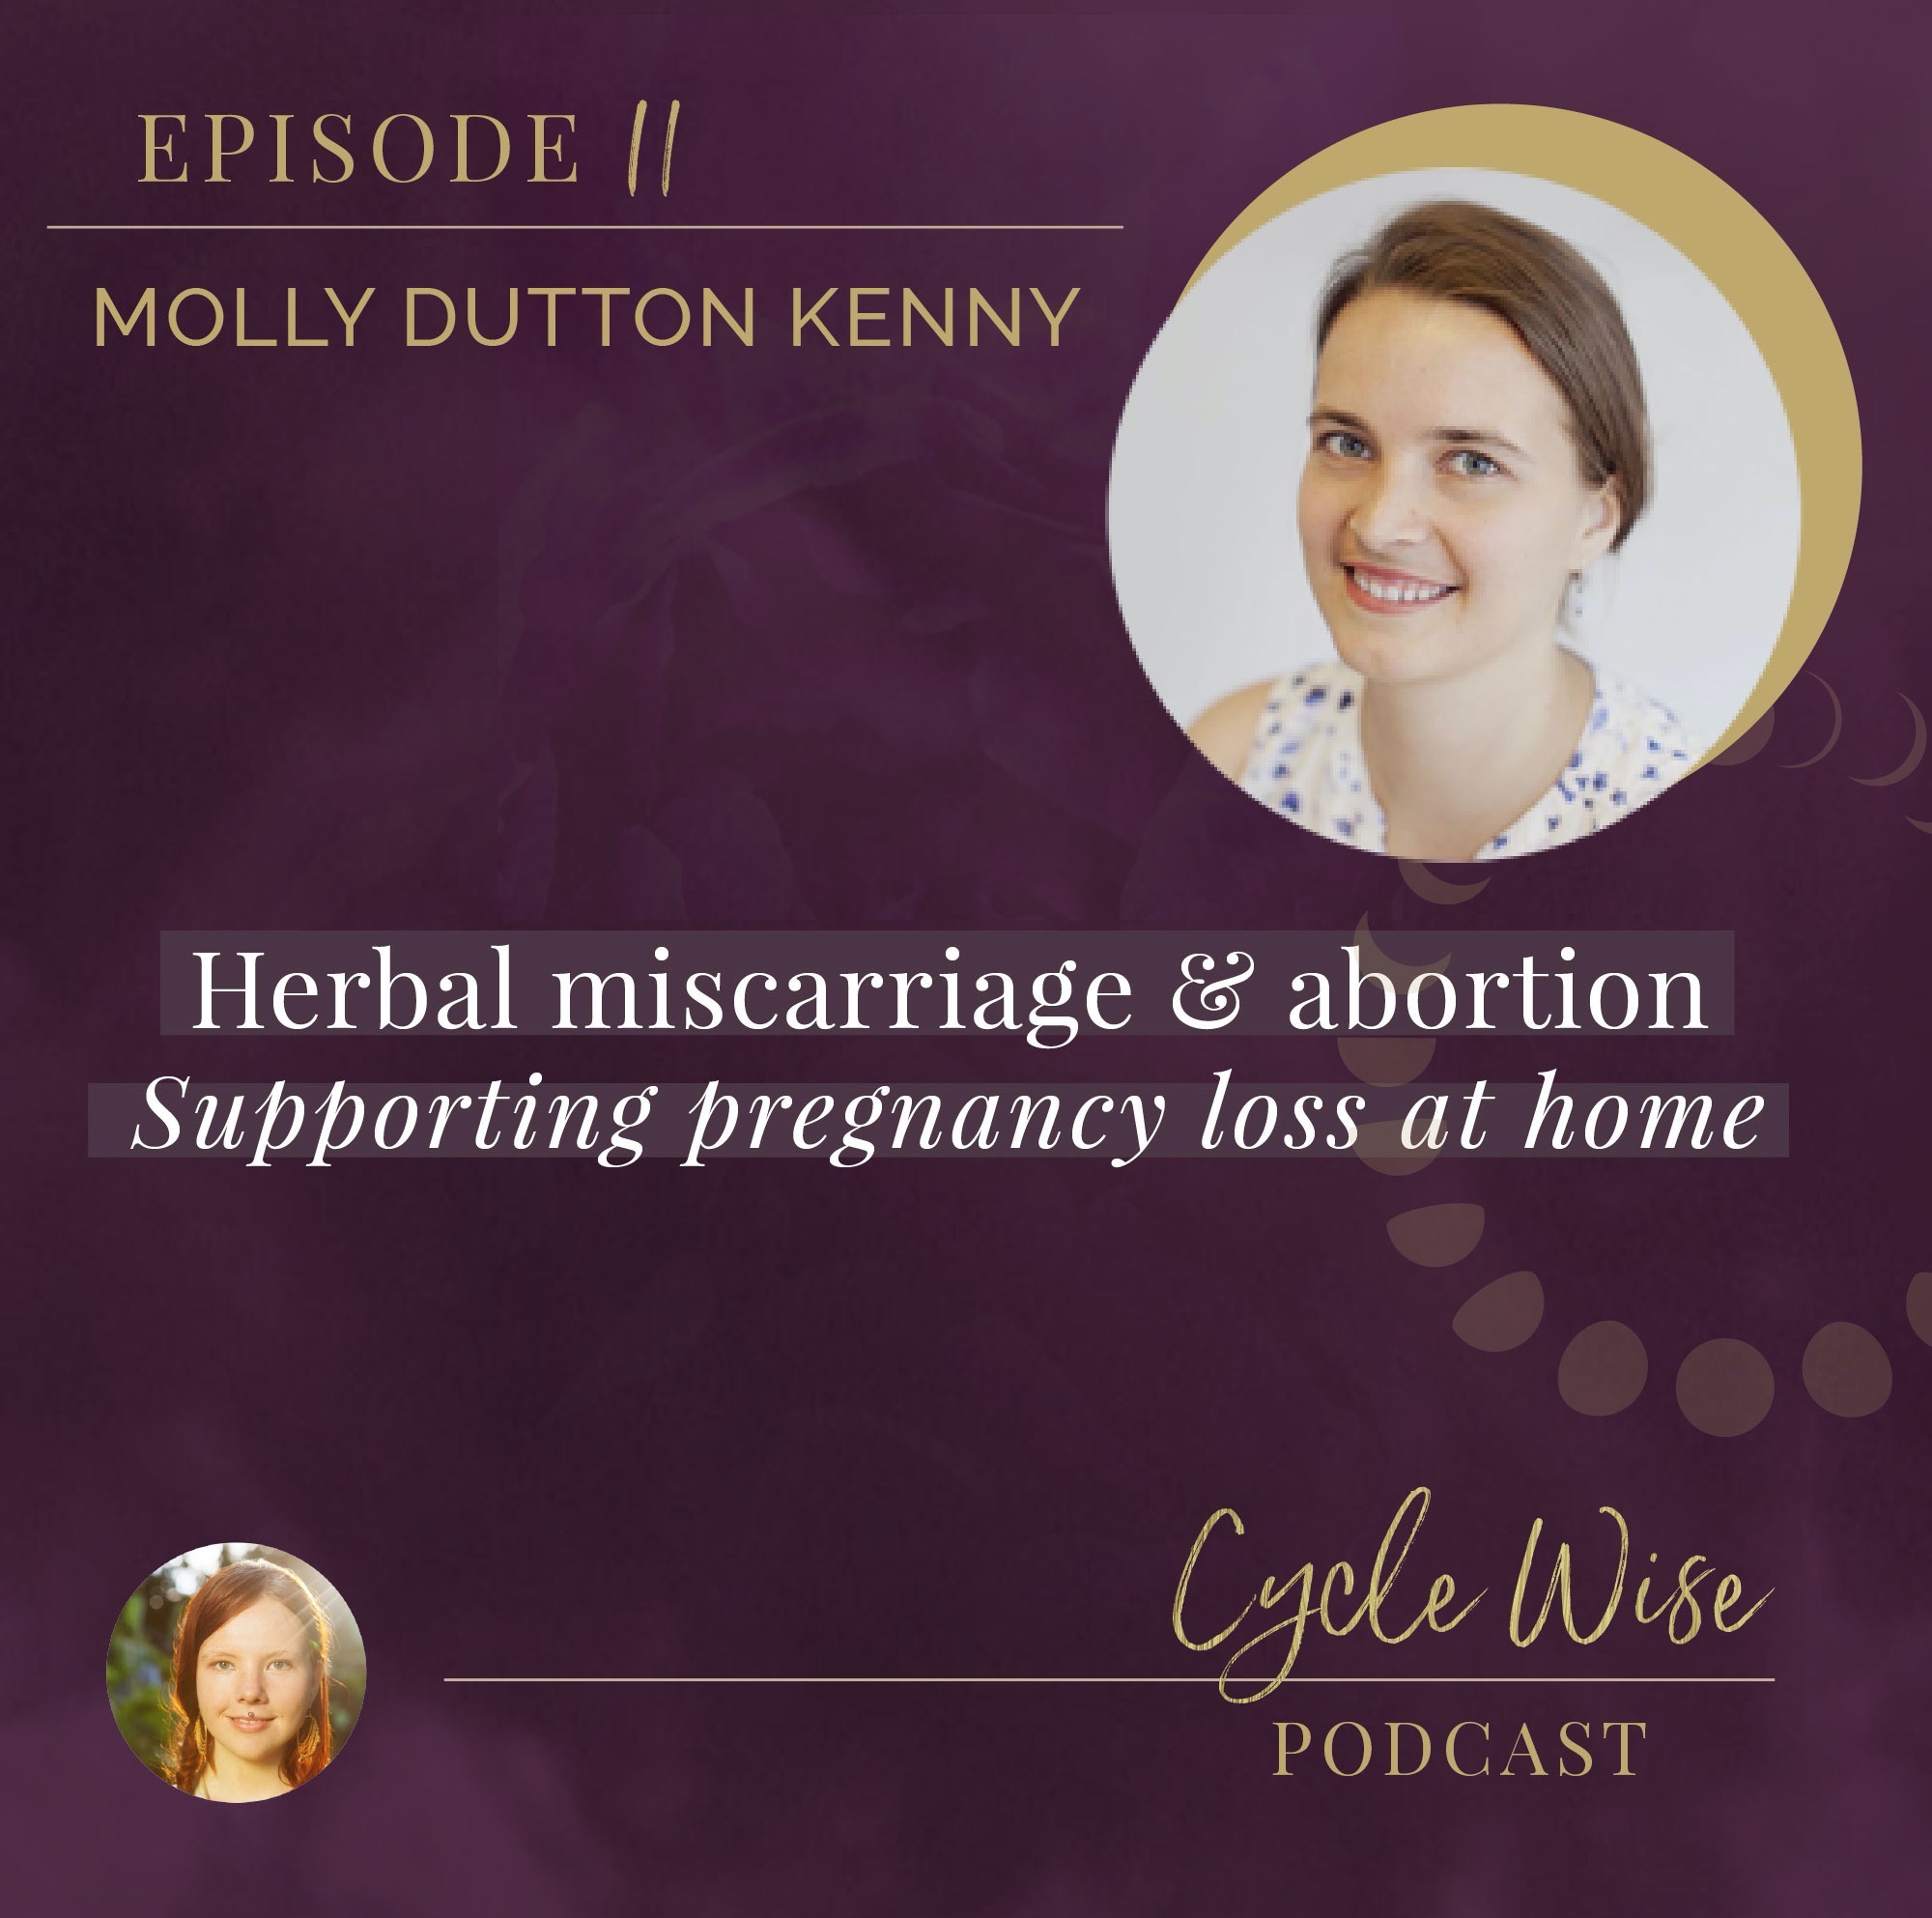 Herbal Miscarriage & Abortion: Supporting pregnancy loss at home with Molly Dutton Kenny